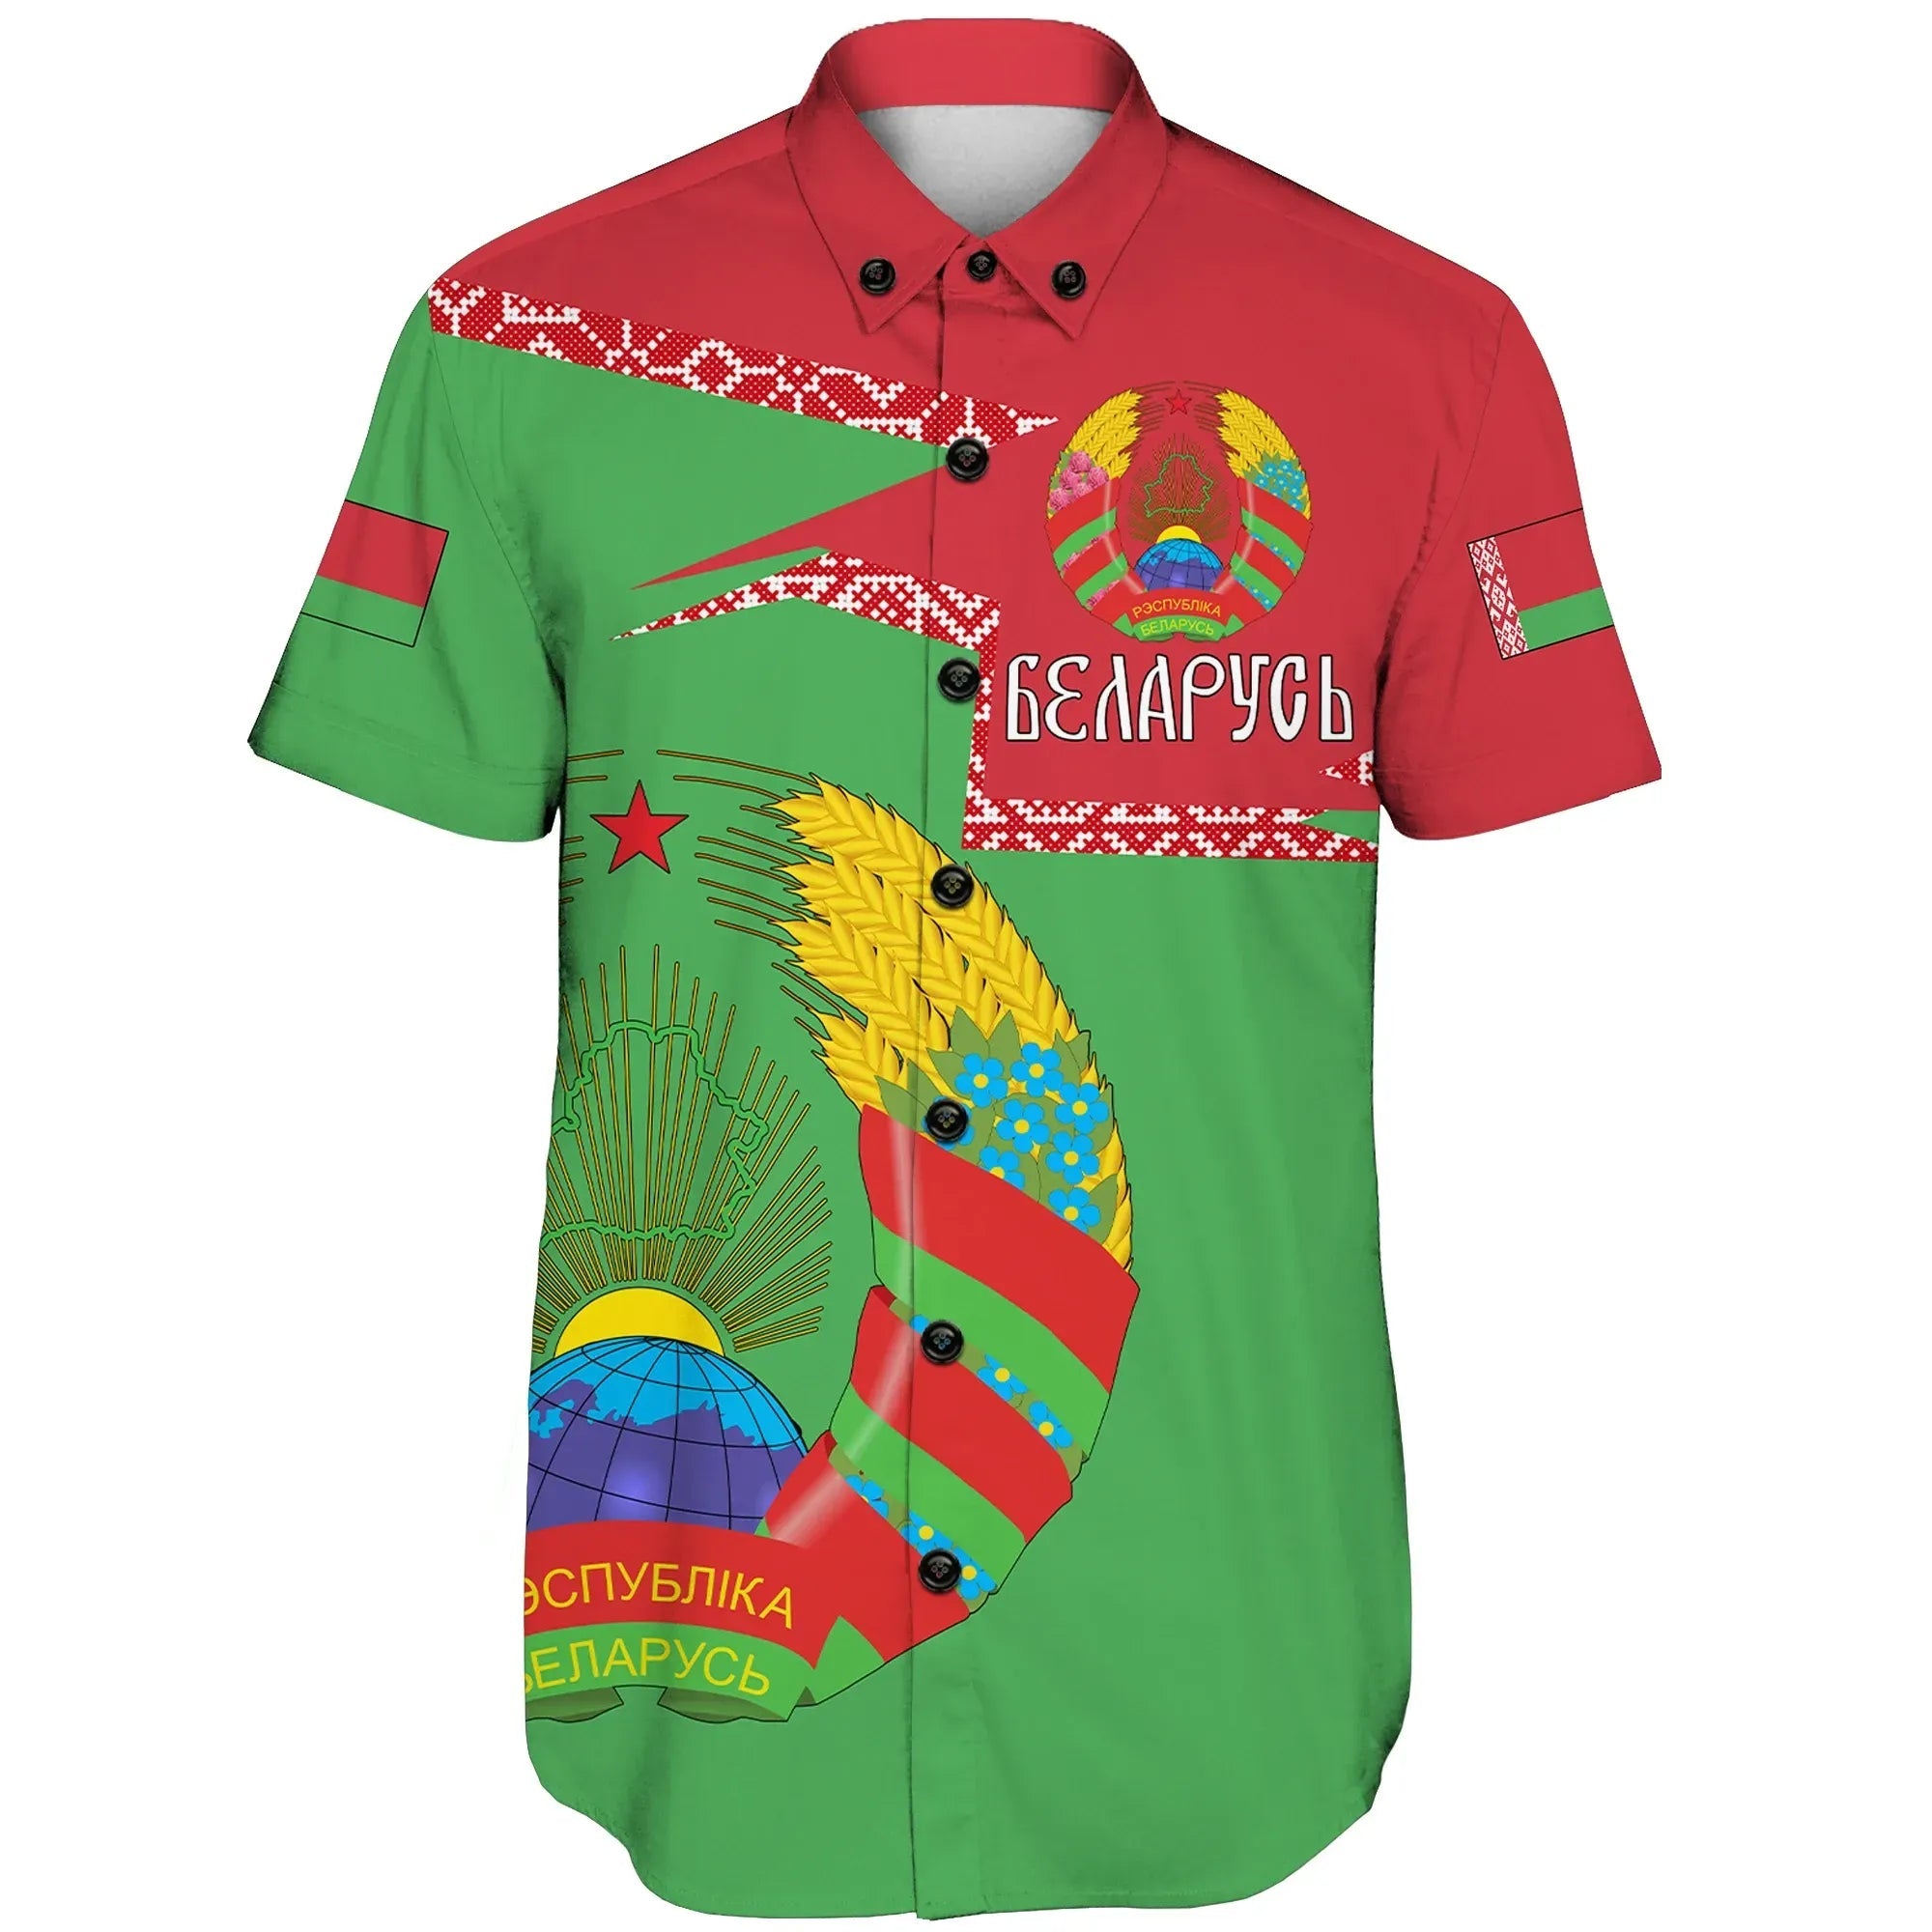 belarus-coat-of-arms-short-sleeve-shirt-new-style